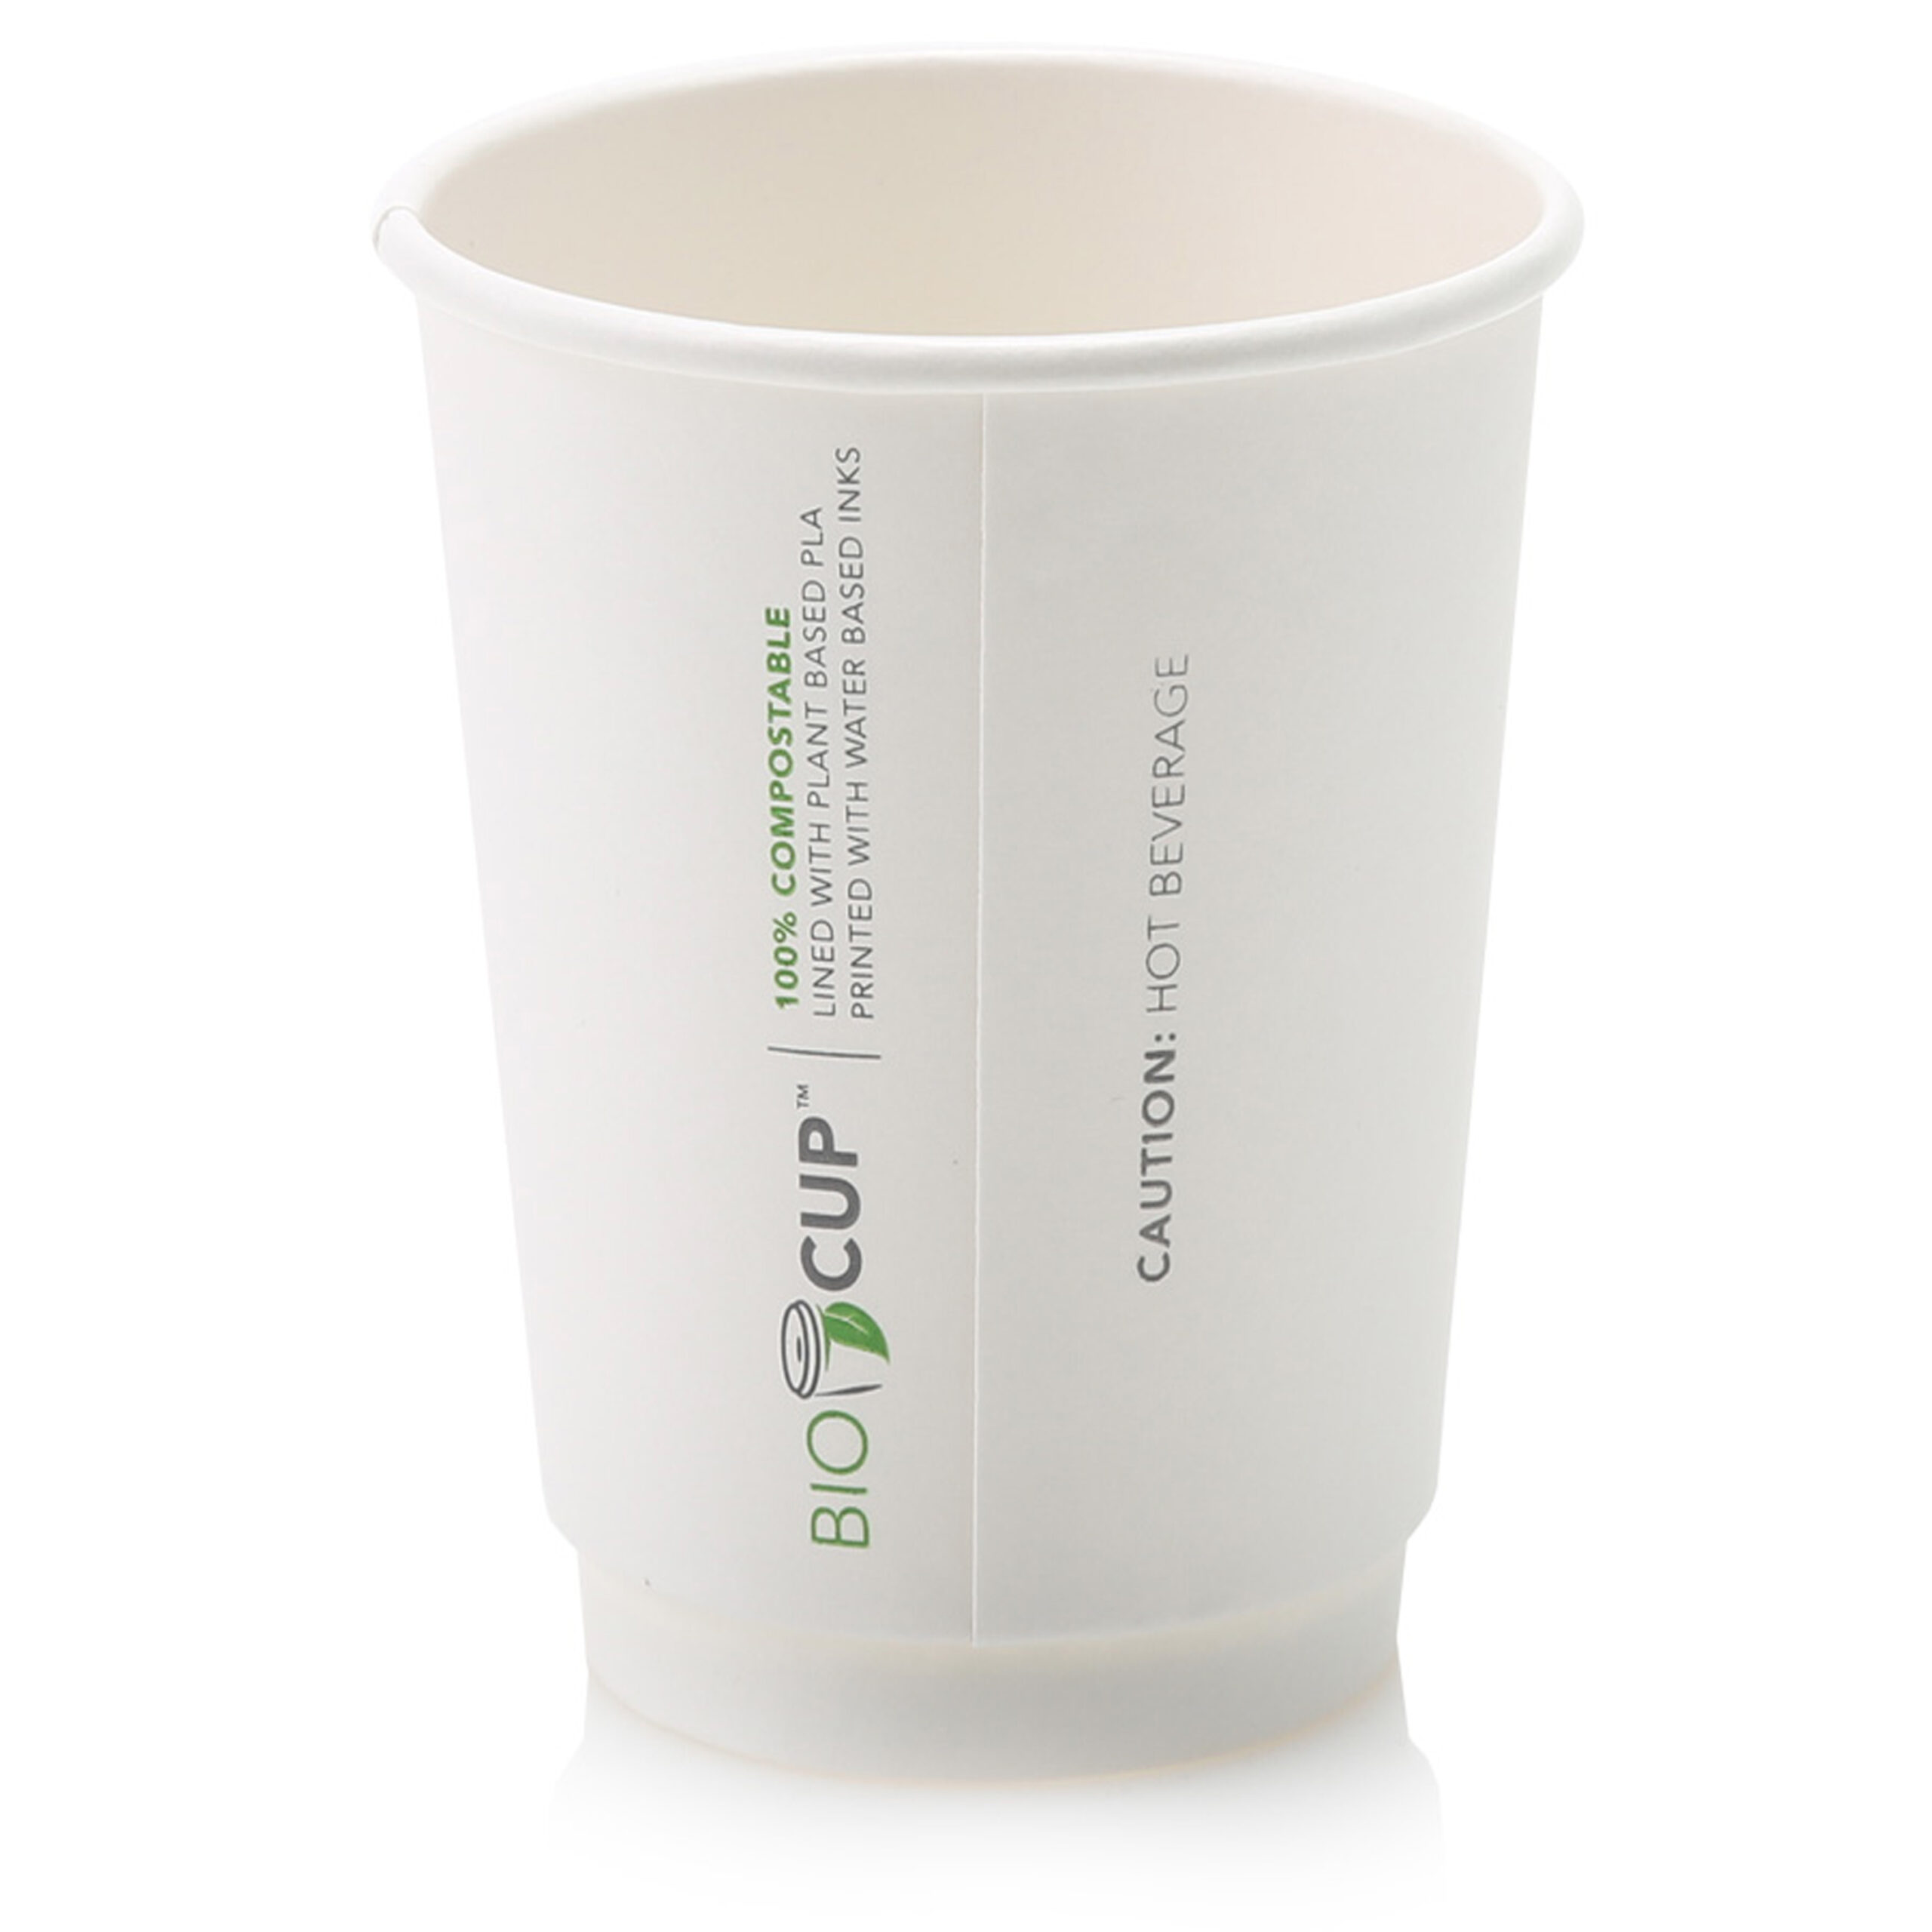 BIOAFRICA DOUBLE WALL COMPOSTABLE BIOCUP 350ml WHITE (1x25)